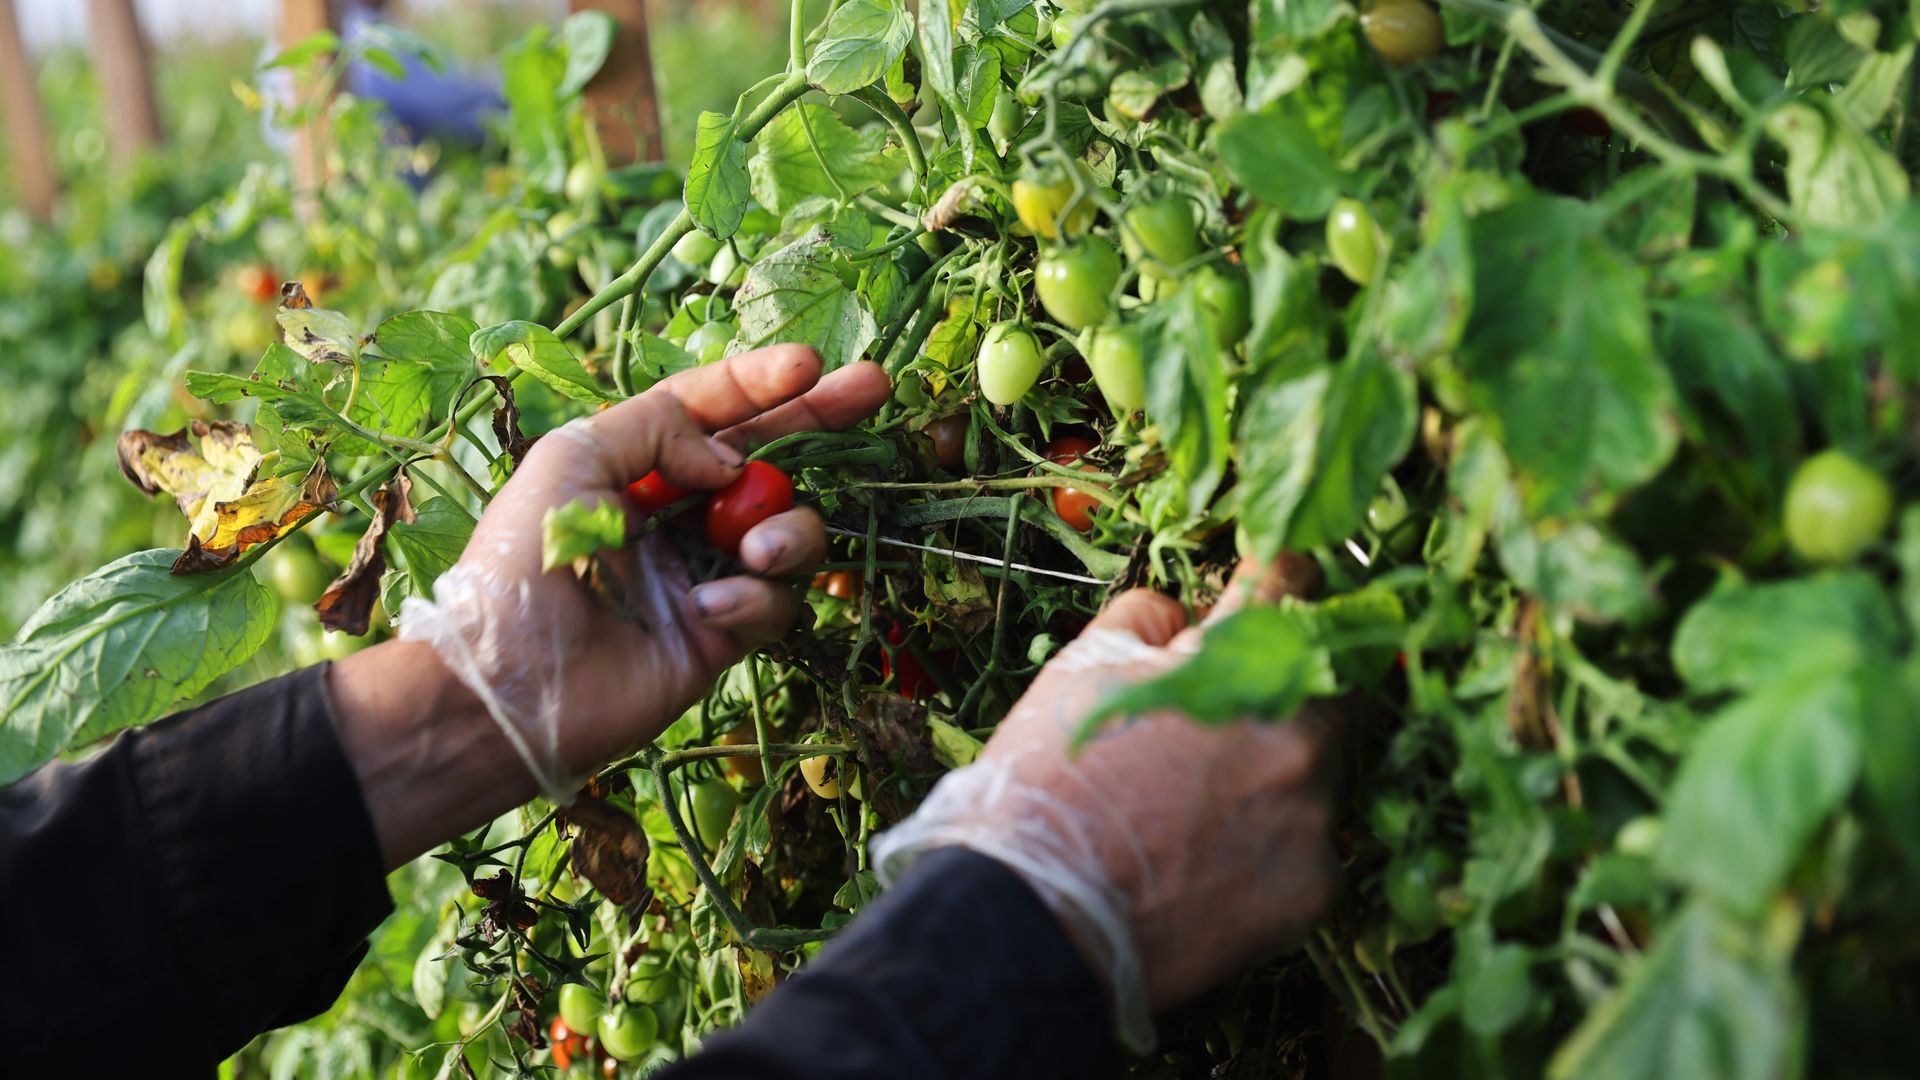 A pair of hands pick cherry tomatoes from a vine.